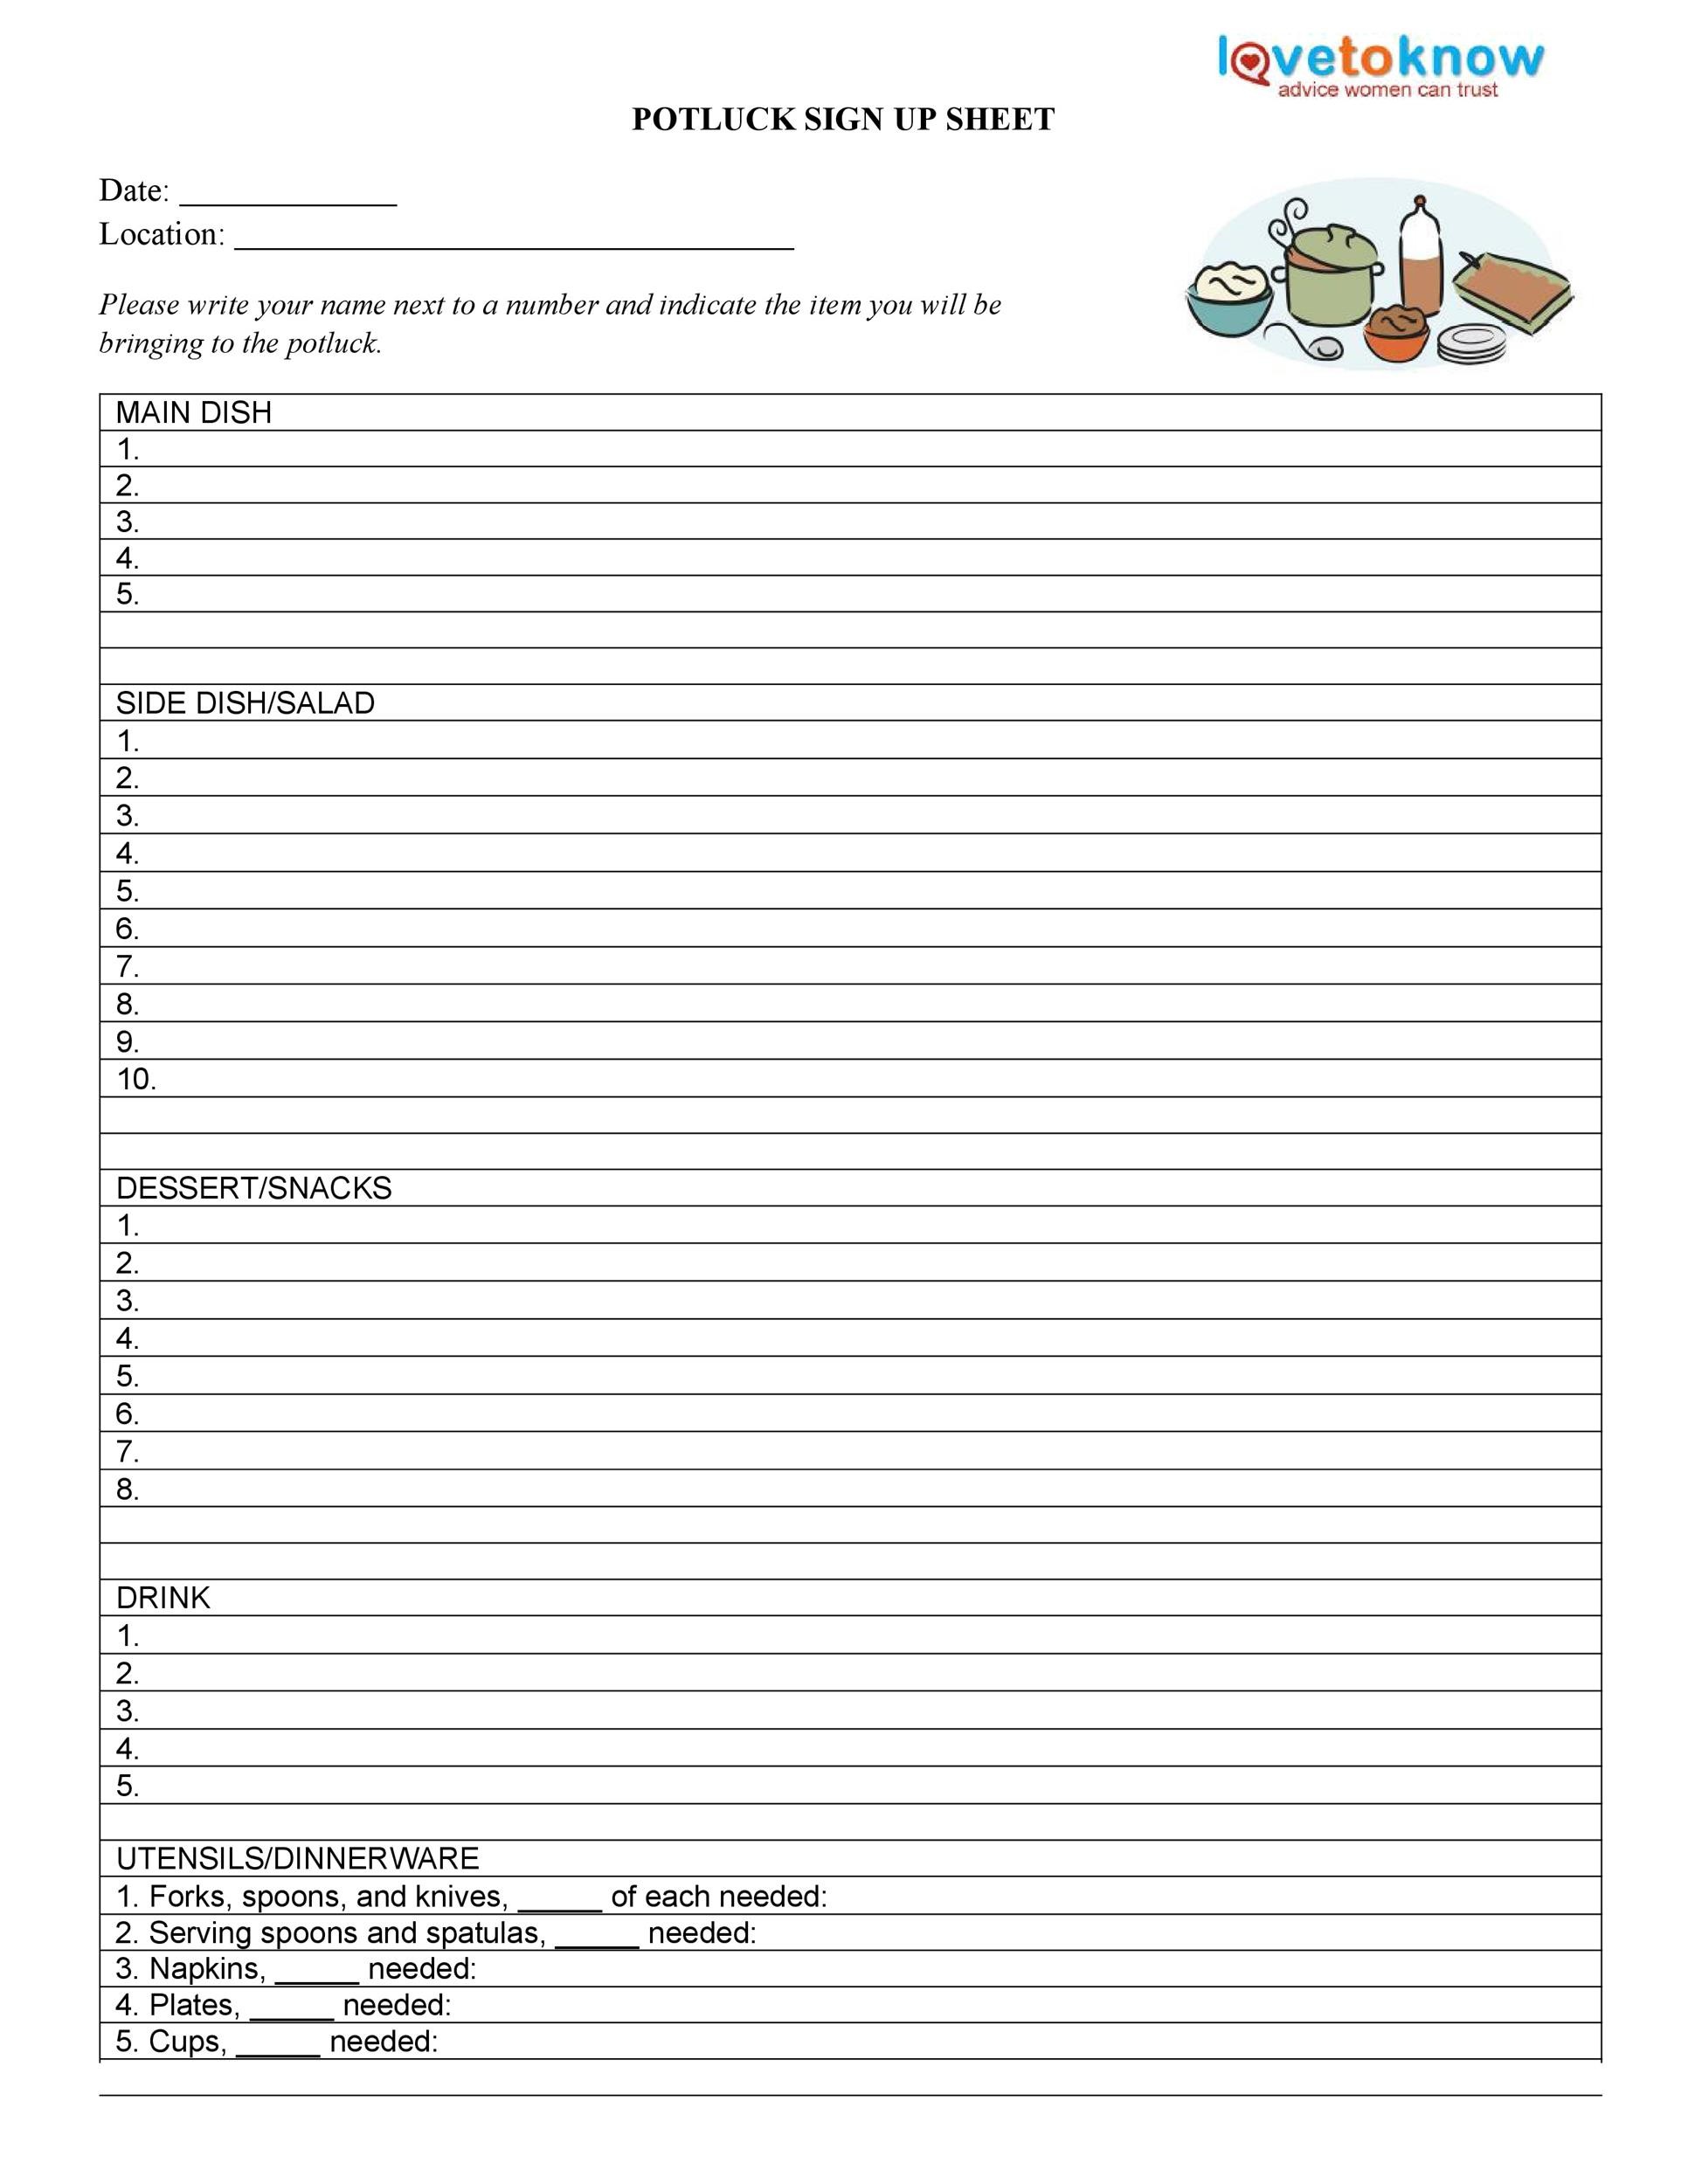 38 Best Potluck Signup Sheets (For Any Occasion) ᐅ TemplateLab